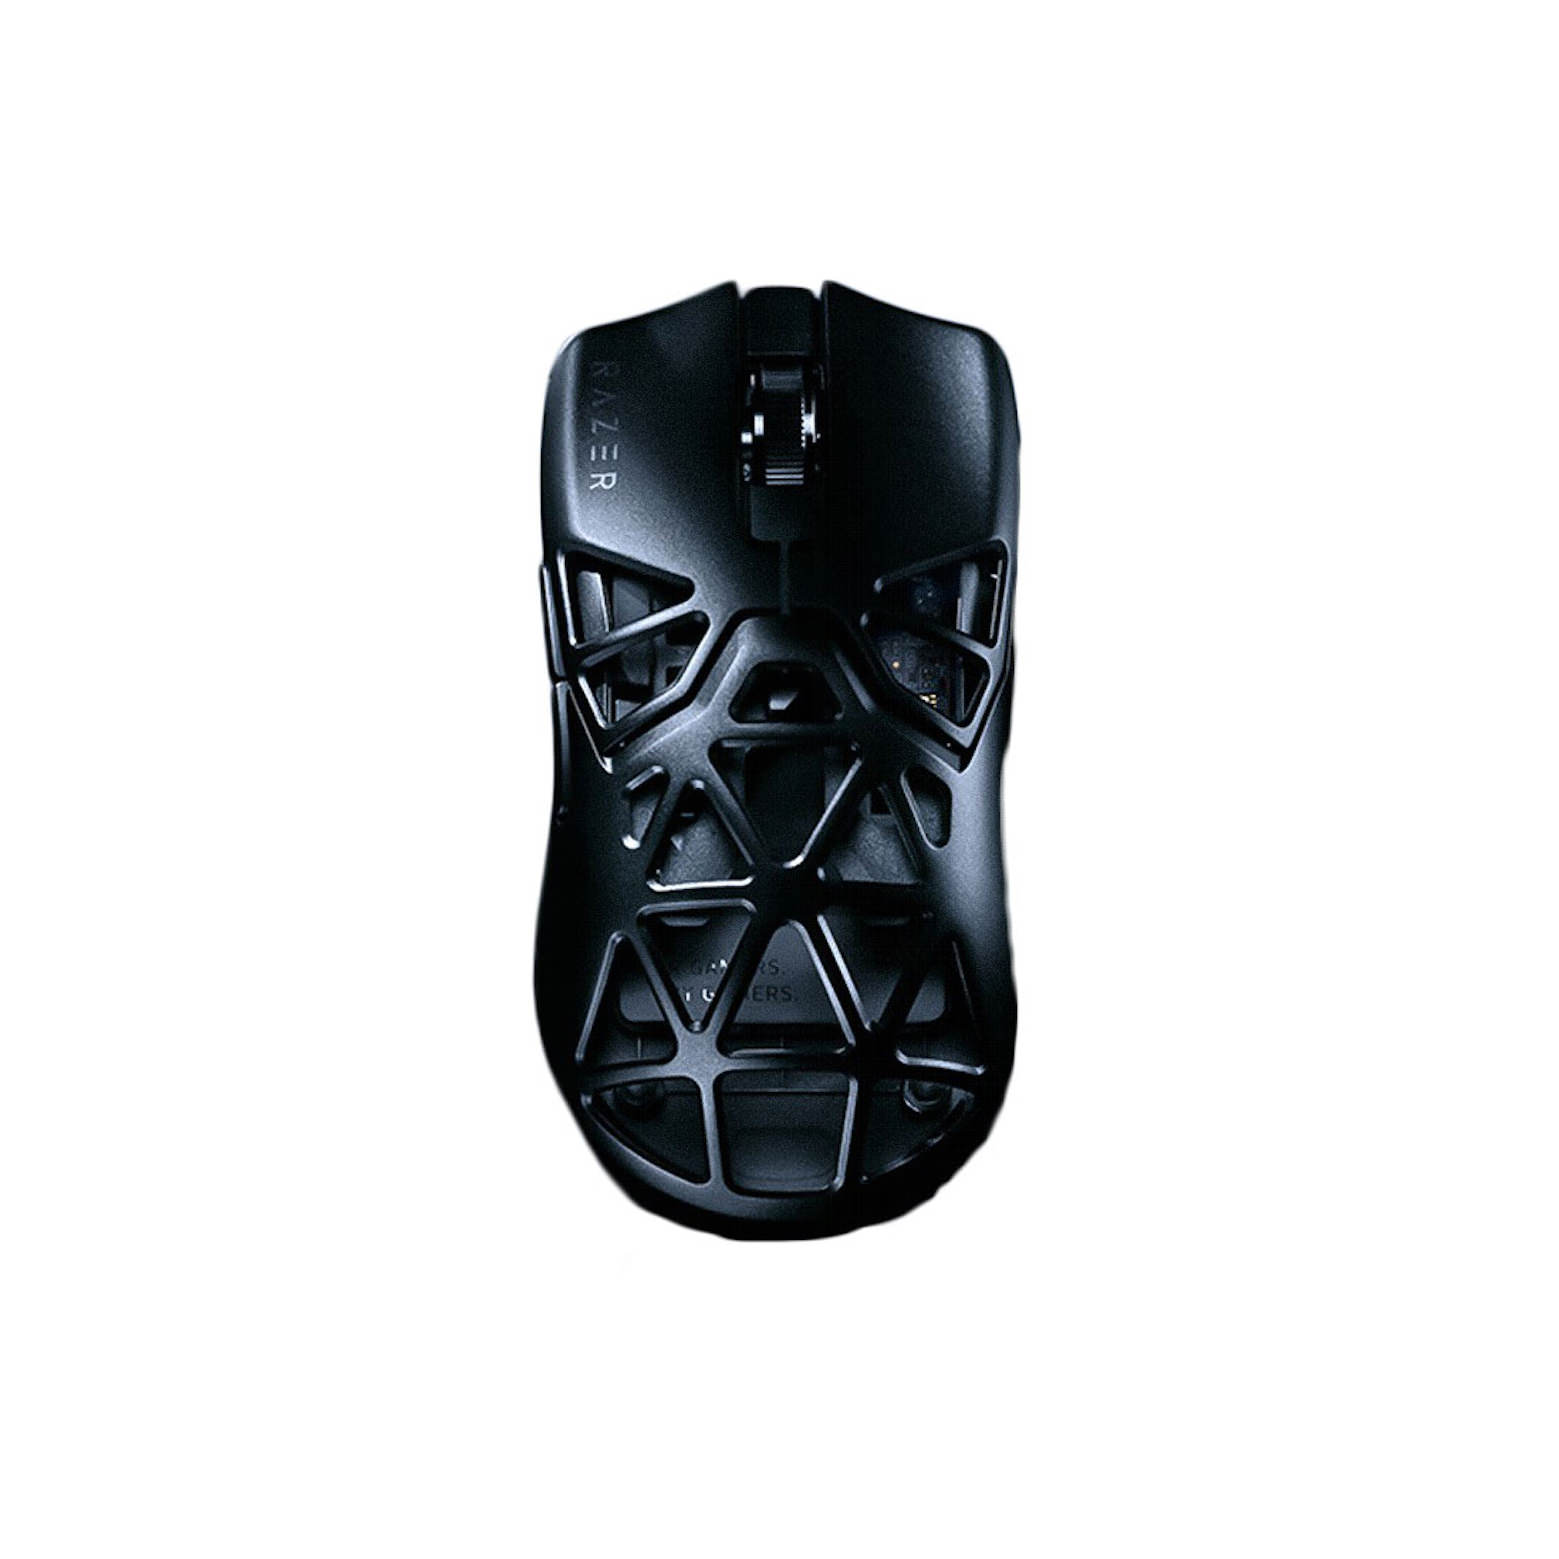 Finalmouse The Last Legend Wireless Mouse (Centerpiece Founders Edition  Access Card Included) Black - US